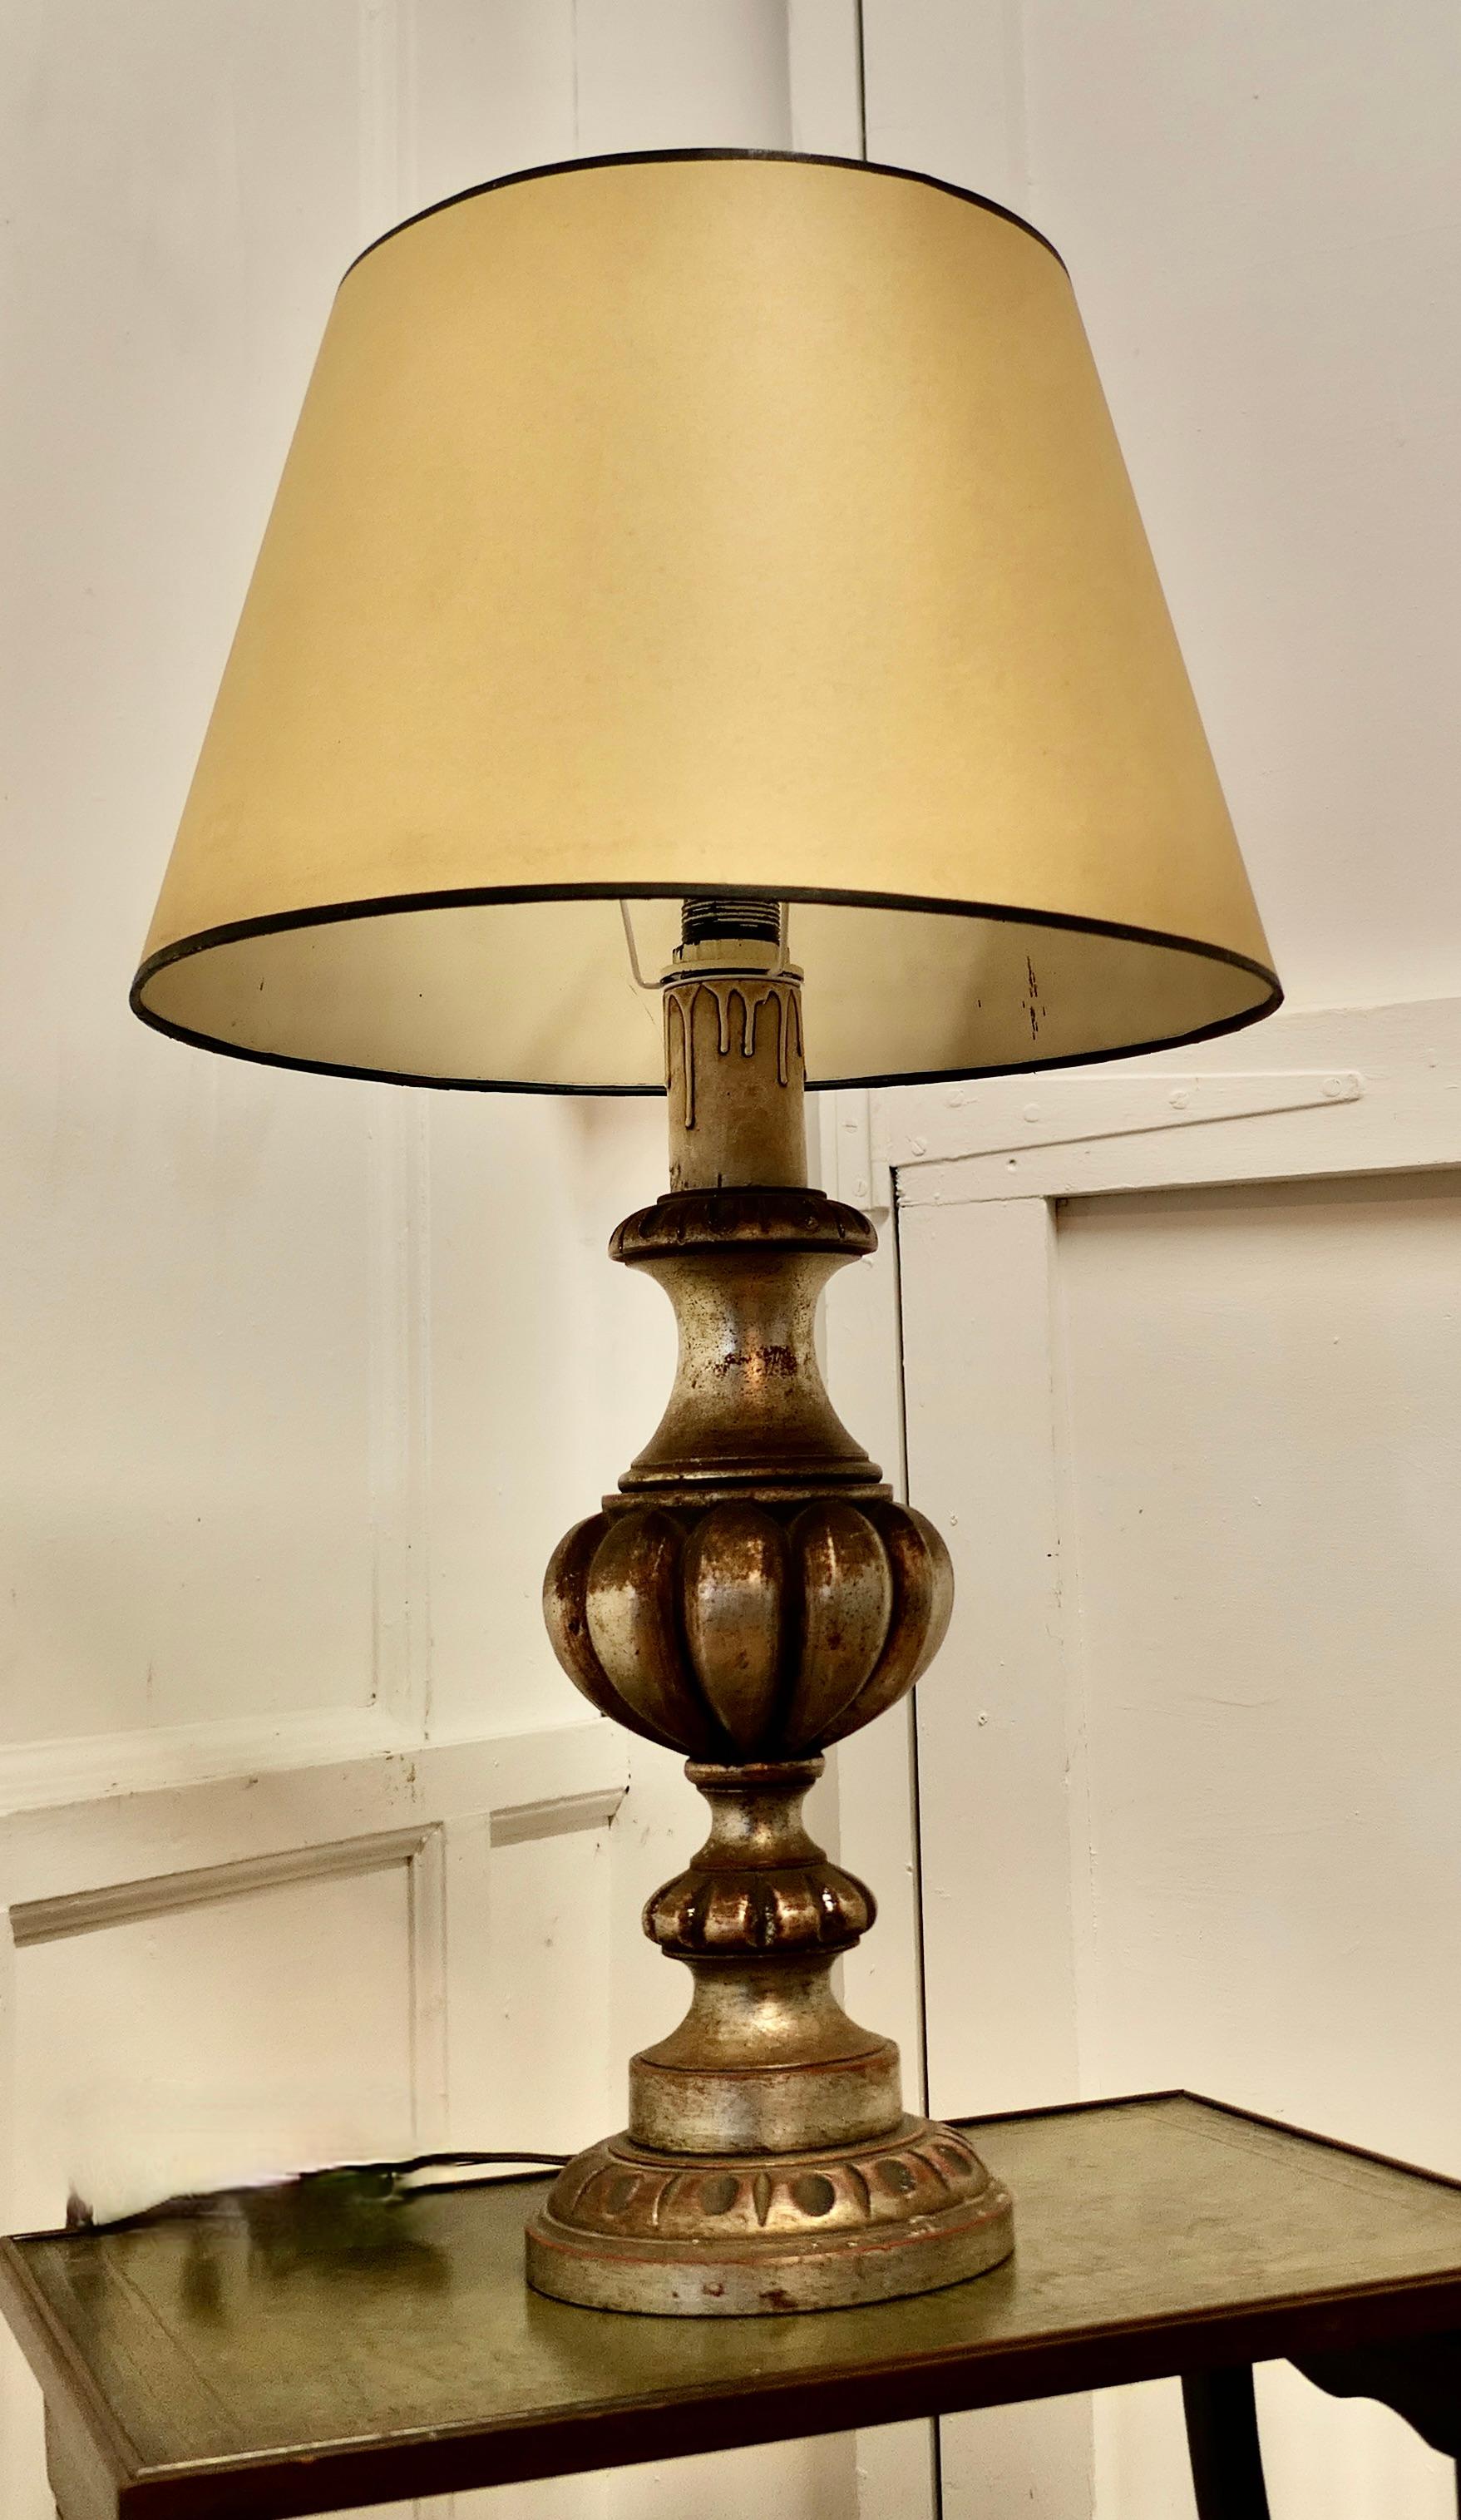 Pine Large Carved Wooden Table Lamp  This is a great statement piece, it has a large  For Sale